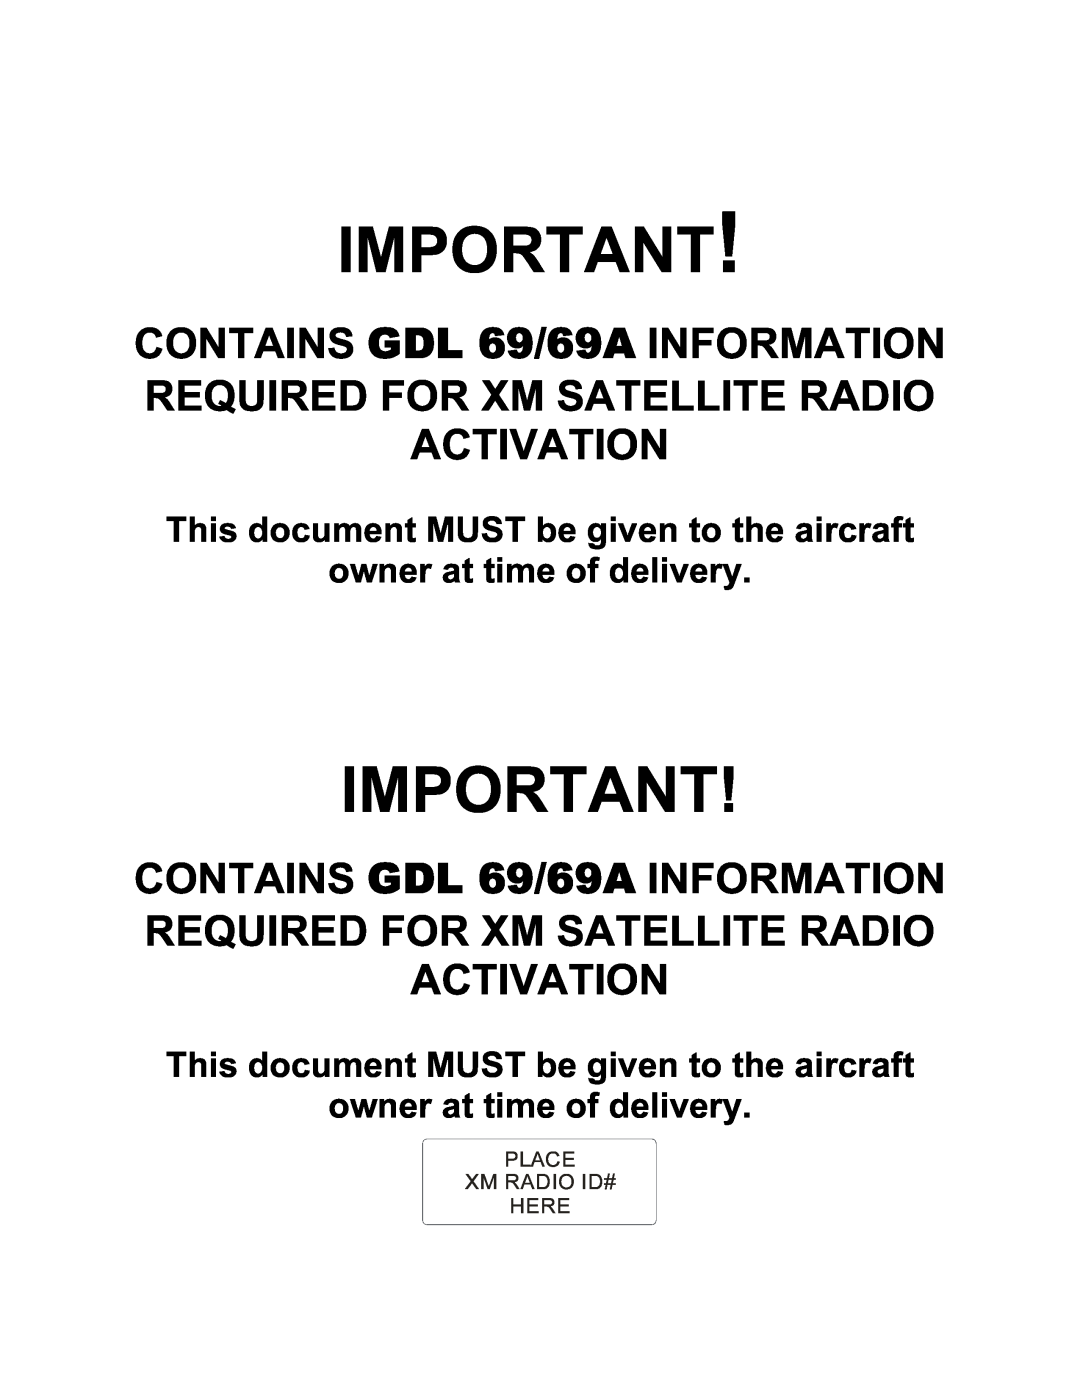 Garmin GDL 69 manual This document MUST be given to the aircraft, owner at time of delivery, Place Xm Radio Id# Here 